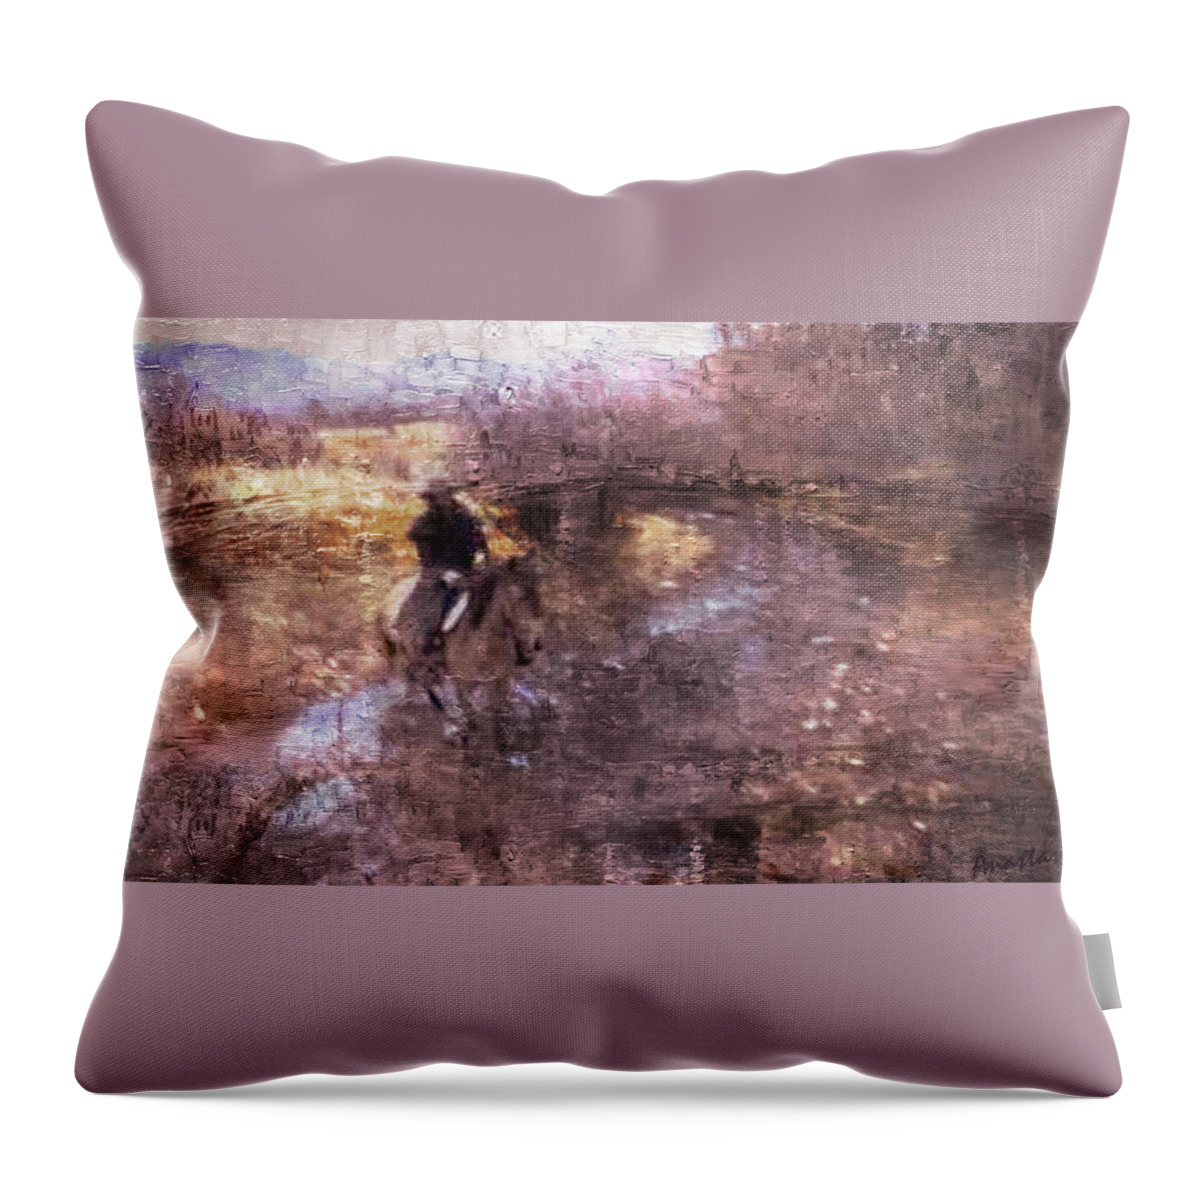 Landscape Throw Pillow featuring the photograph She Rides A Mustang-Wrangler In The Rain II by Anastasia Savage Ealy